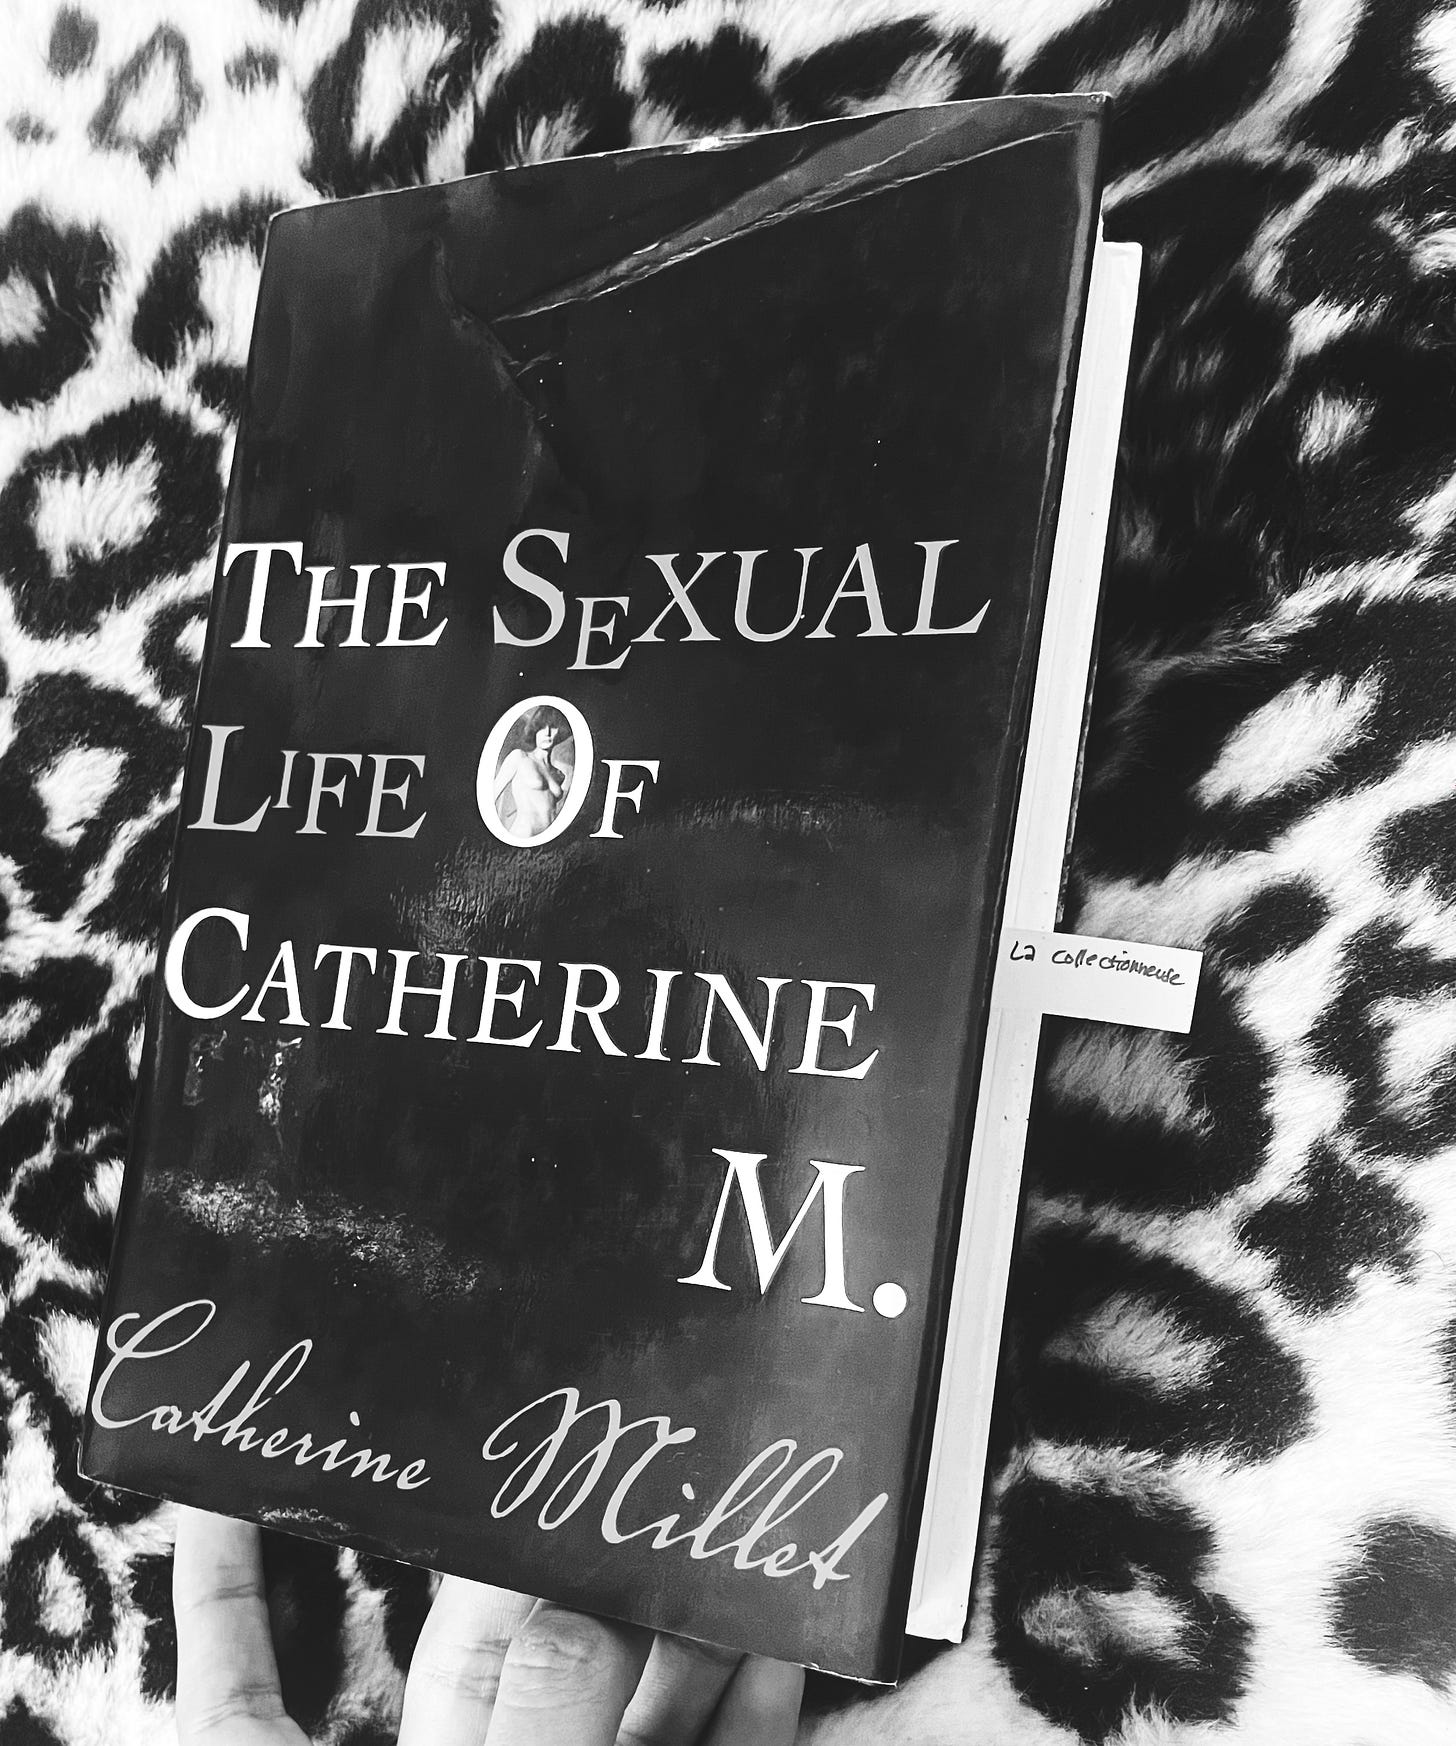 Catherine Millet's book The Sexual Life of Catherine M. with a book tag that says "La Collectionneuse"